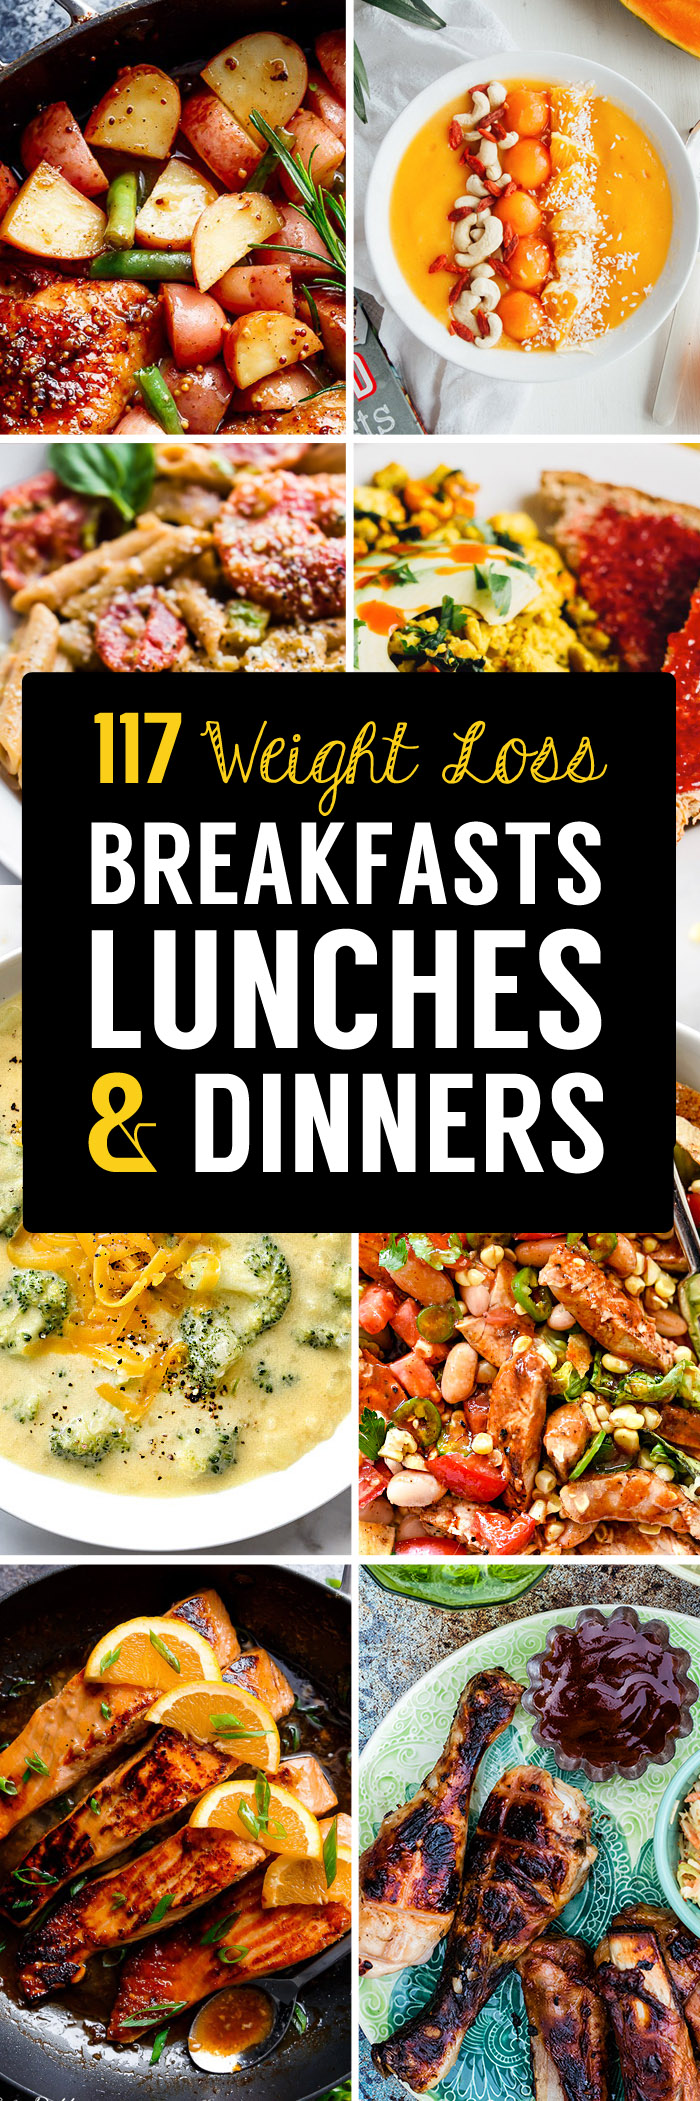 117 Weight Loss Meal Recipes For Every Time Of The Day! - TrimmedandToned